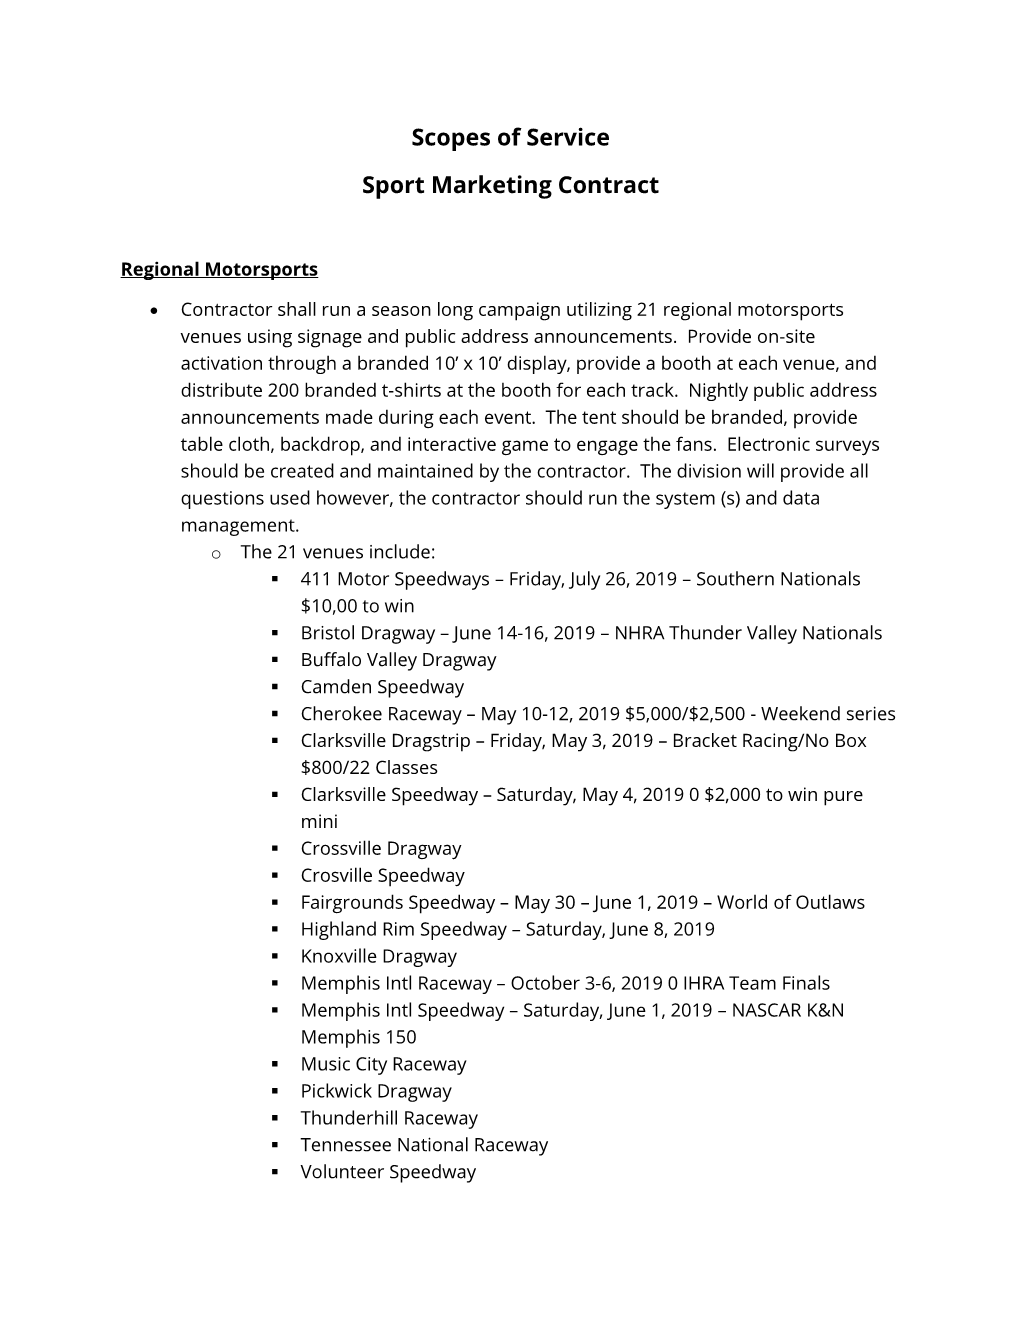 Scopes of Service Sport Marketing Contract